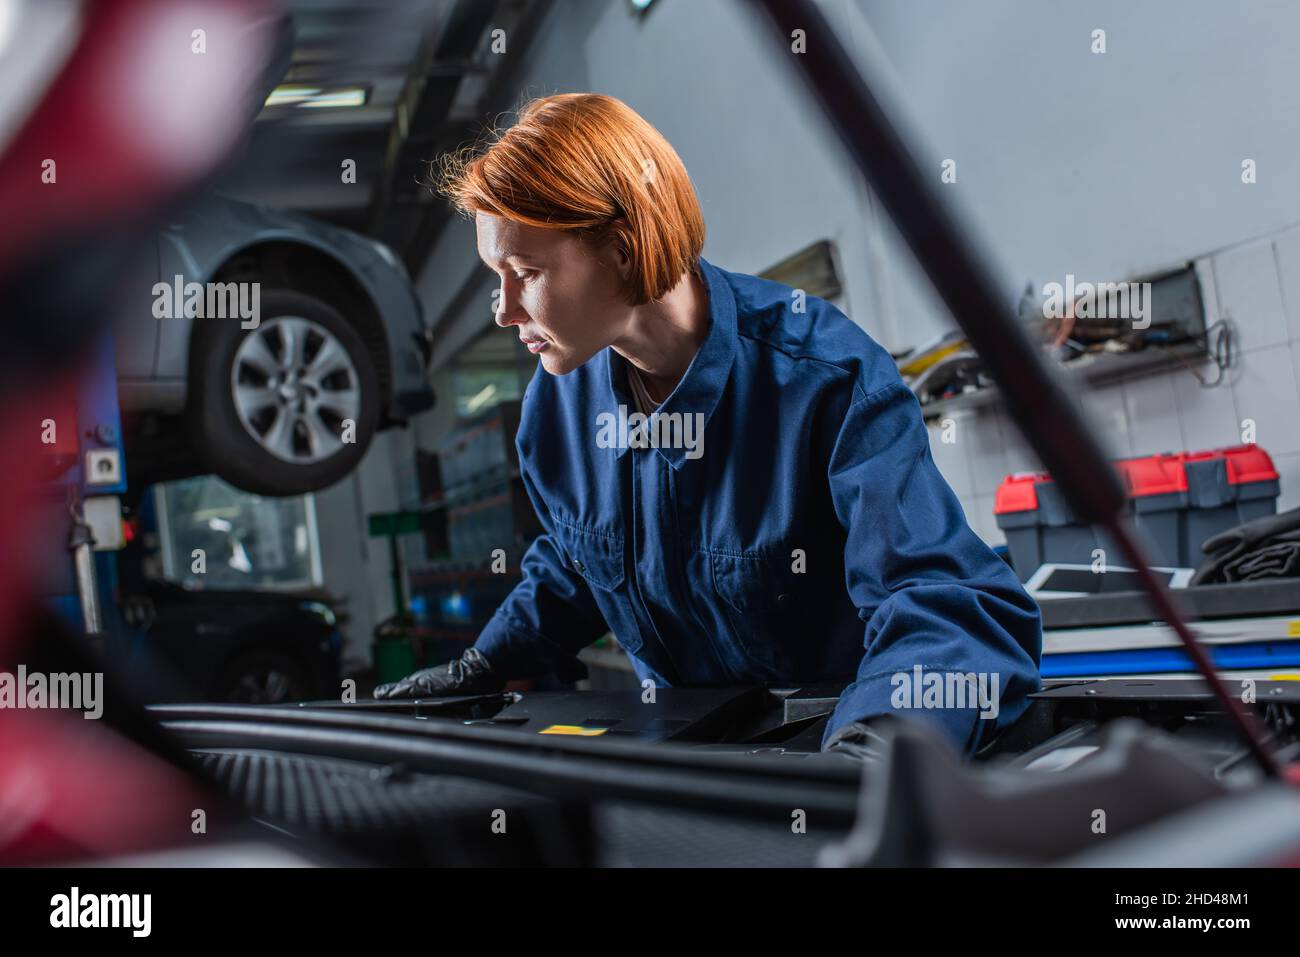 forewoman in uniform inspecting blurred car with open hood in workshop Stock Photo